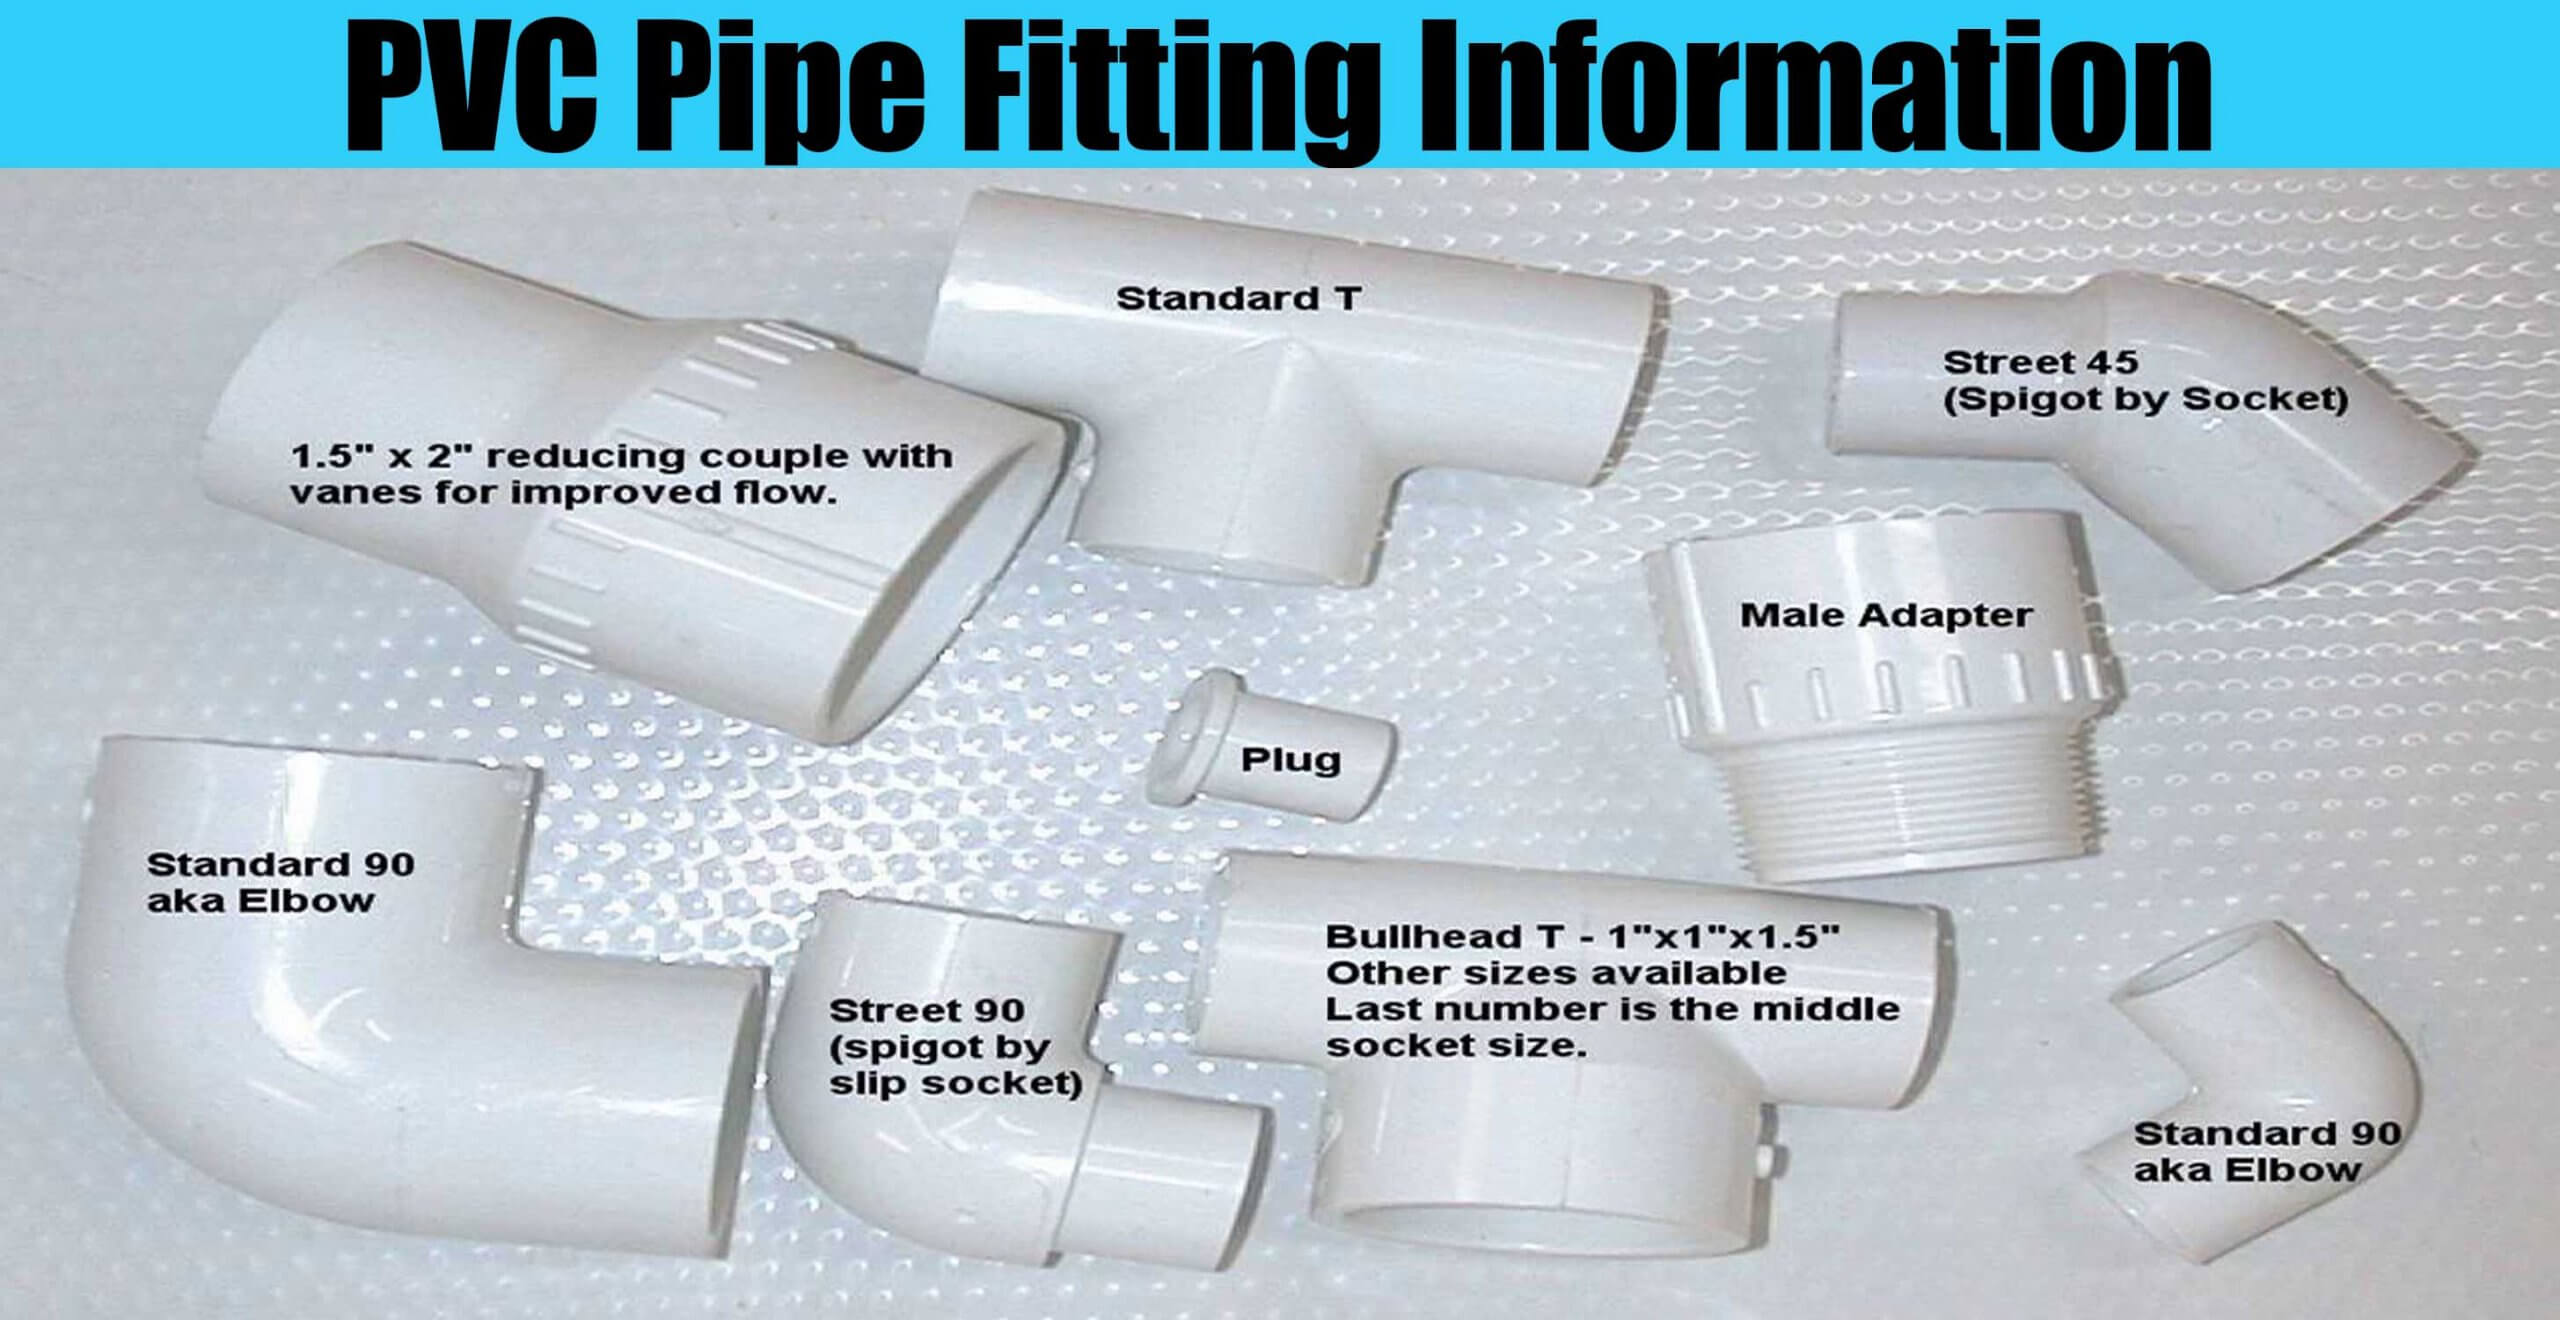 What Size Pvc Pipes Are There - Design Talk